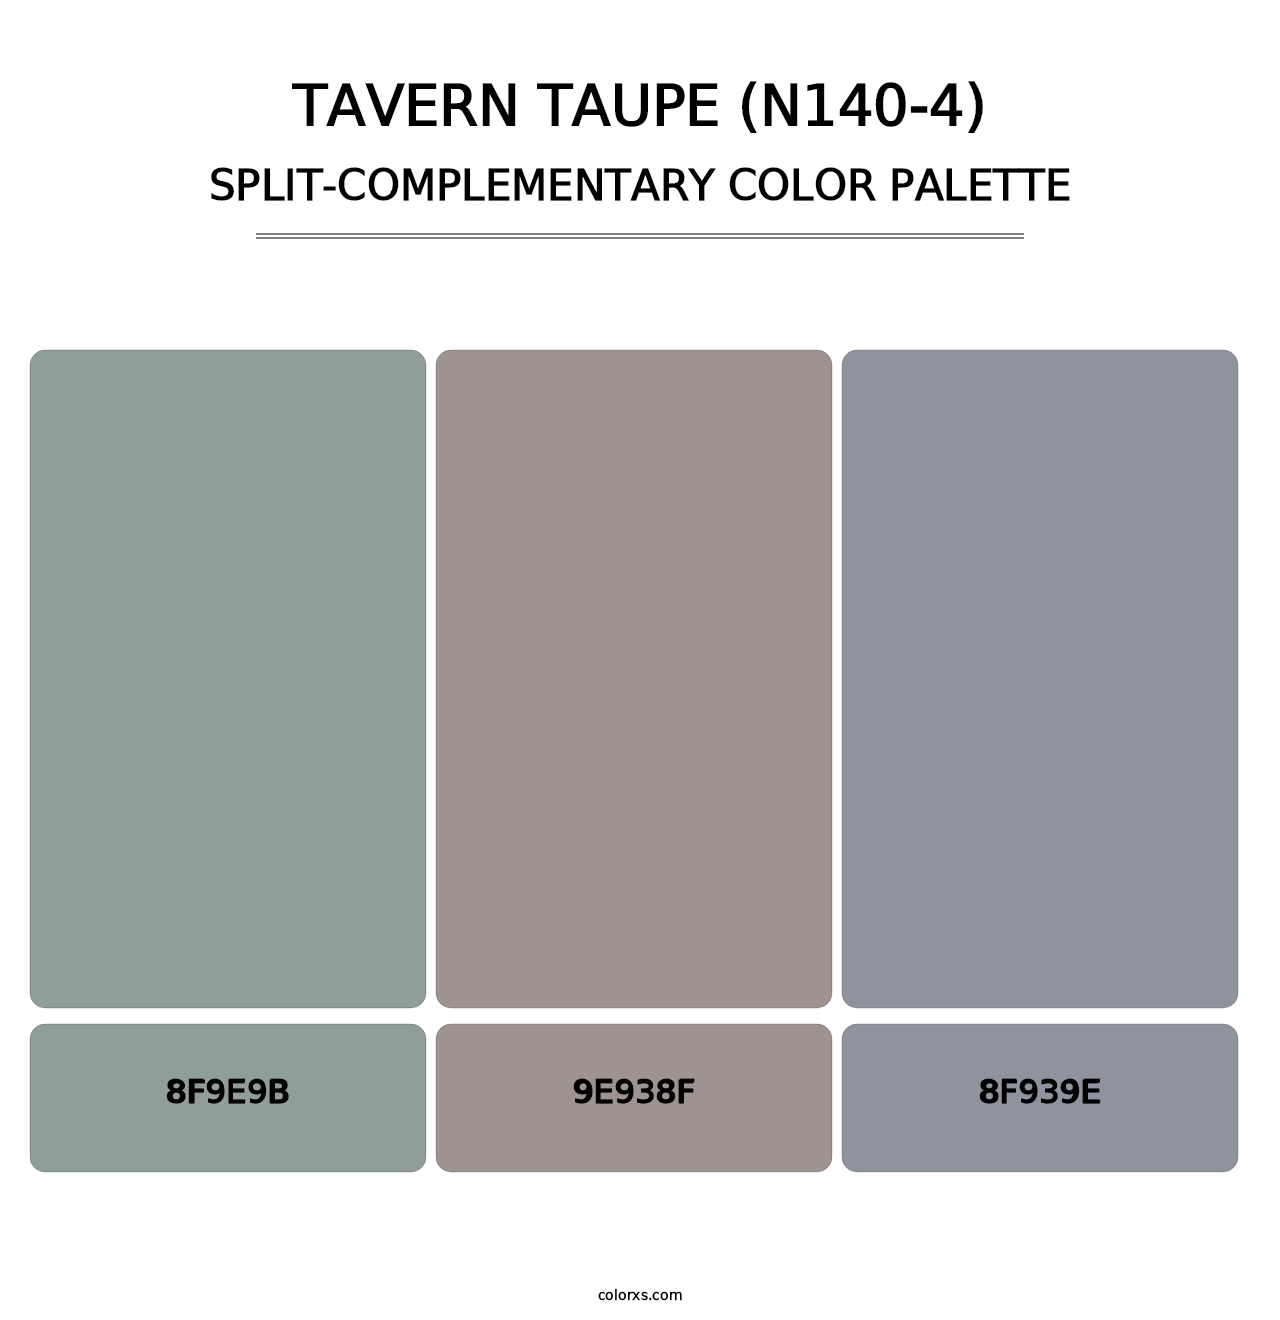 Tavern Taupe (N140-4) - Split-Complementary Color Palette